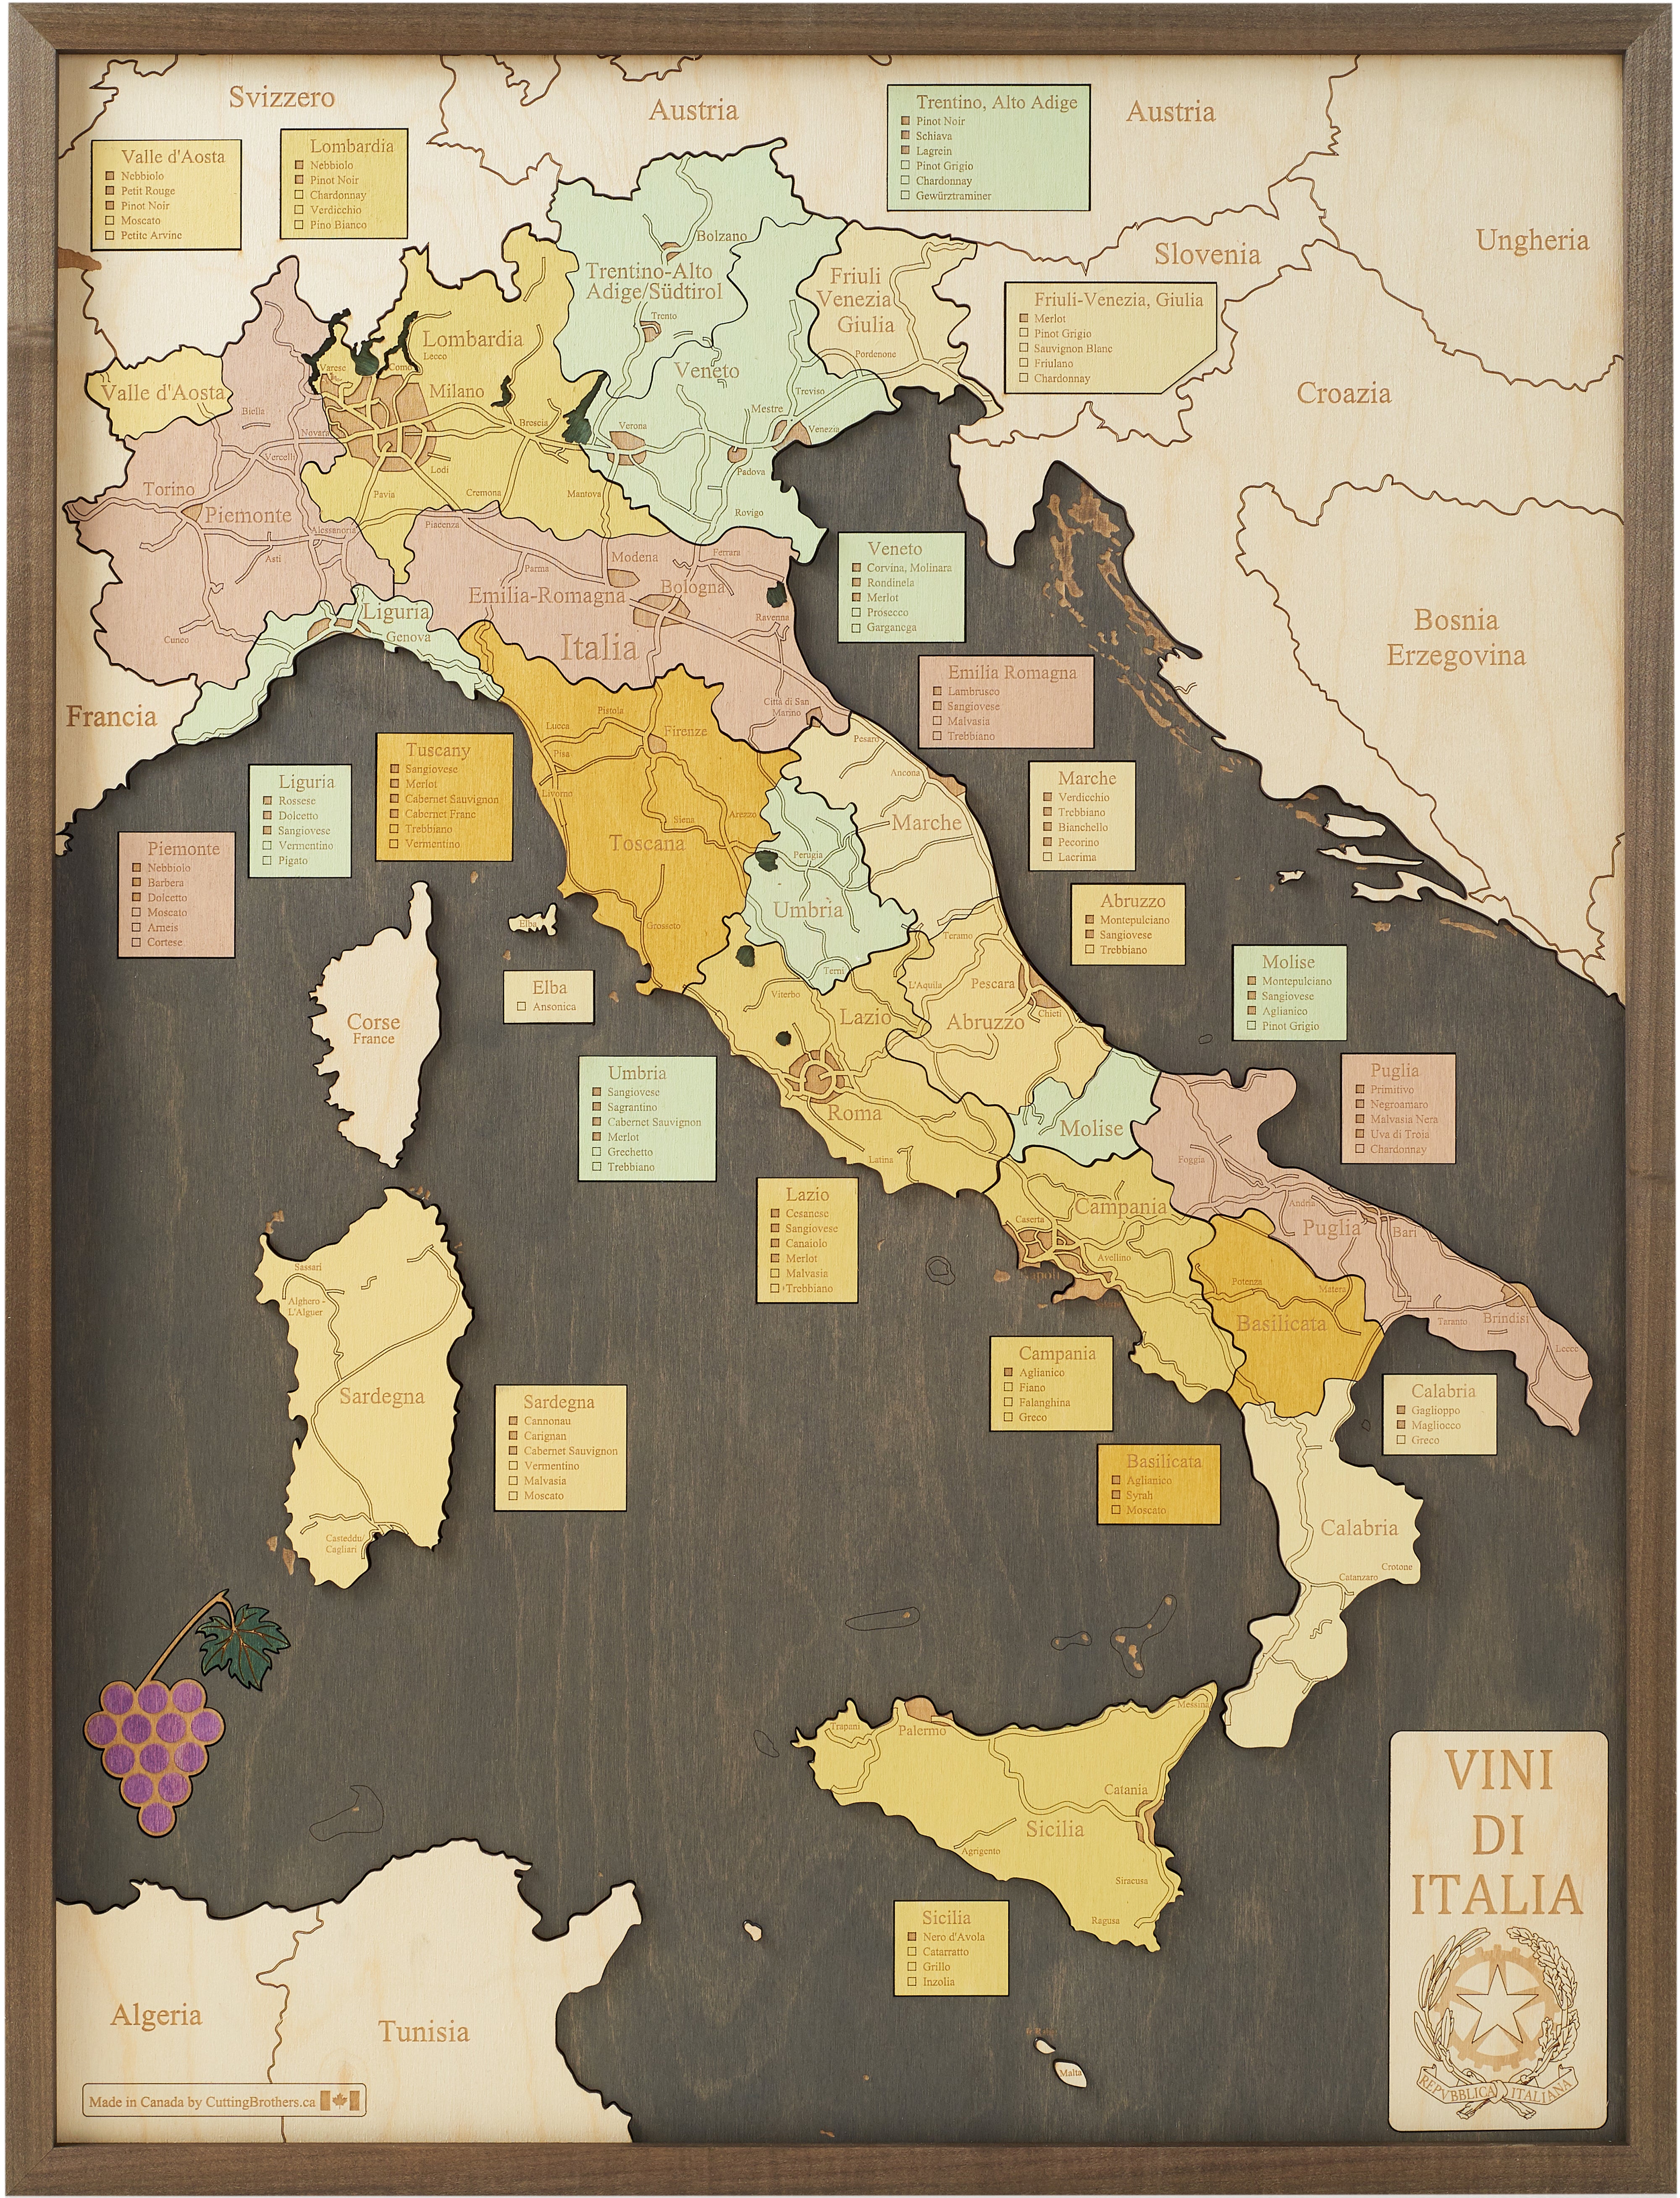 ITALY WINE REGIONS 3D WOODEN WALL MAP - Version L